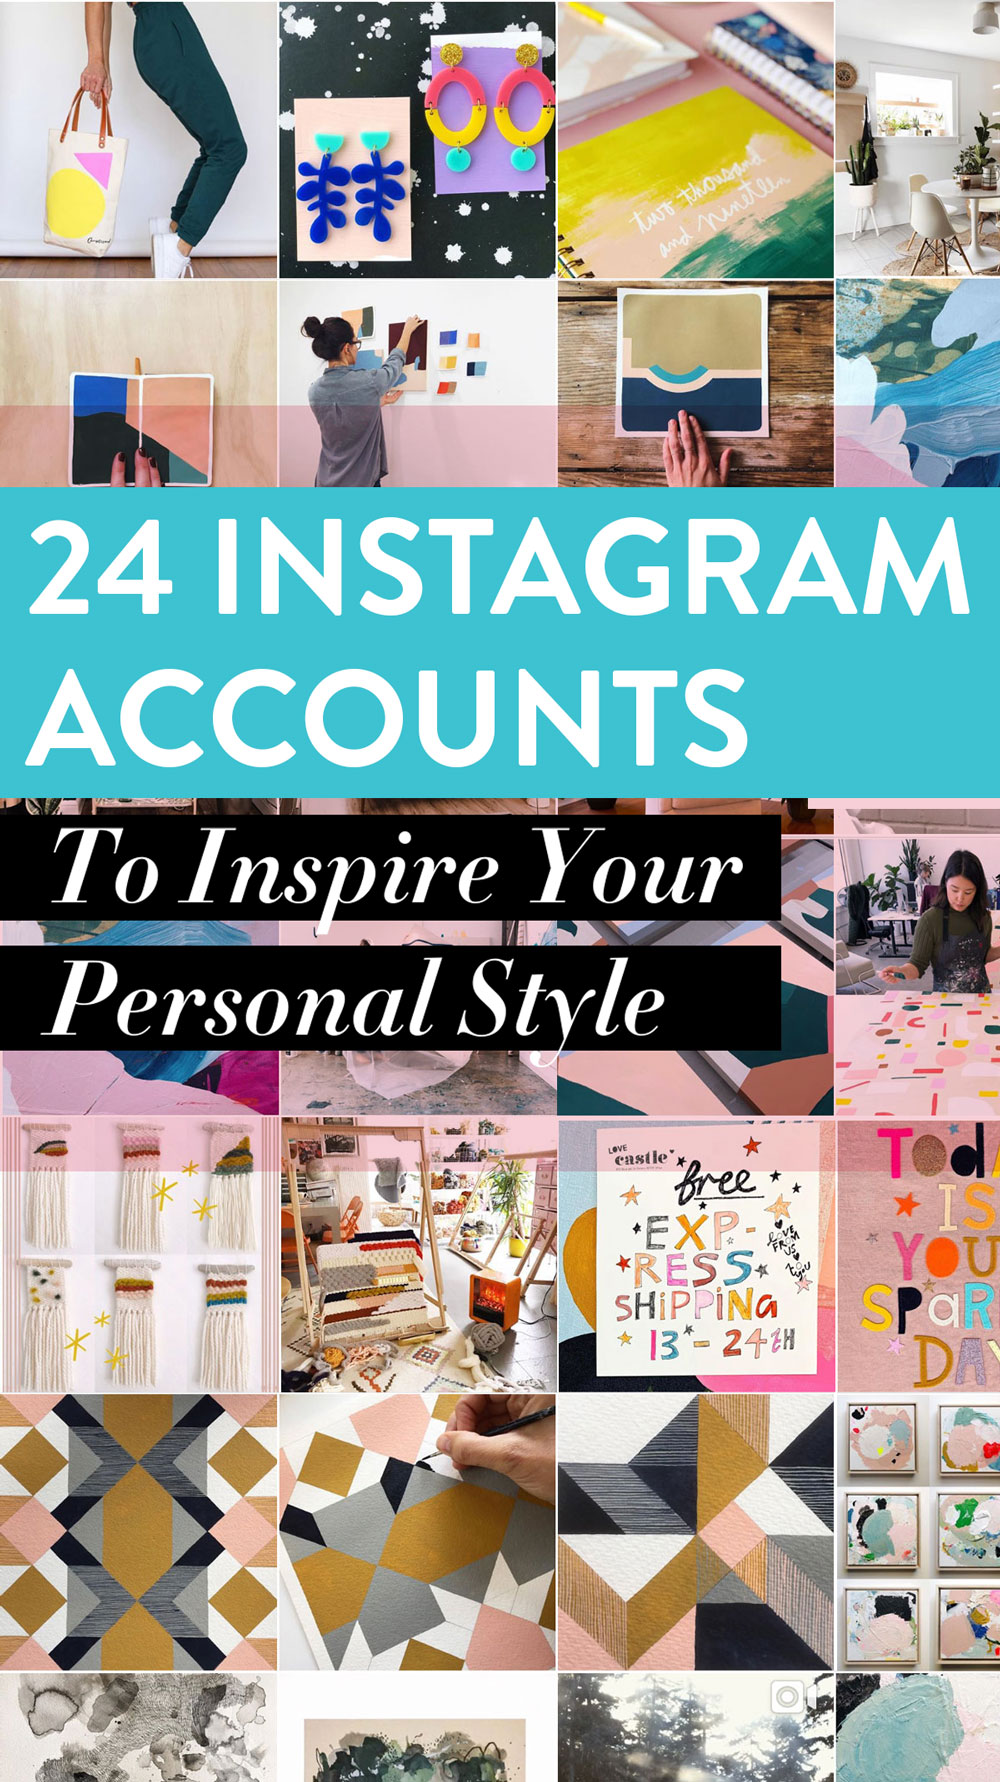 24 Instagram accounts to inspire your personal color and style!